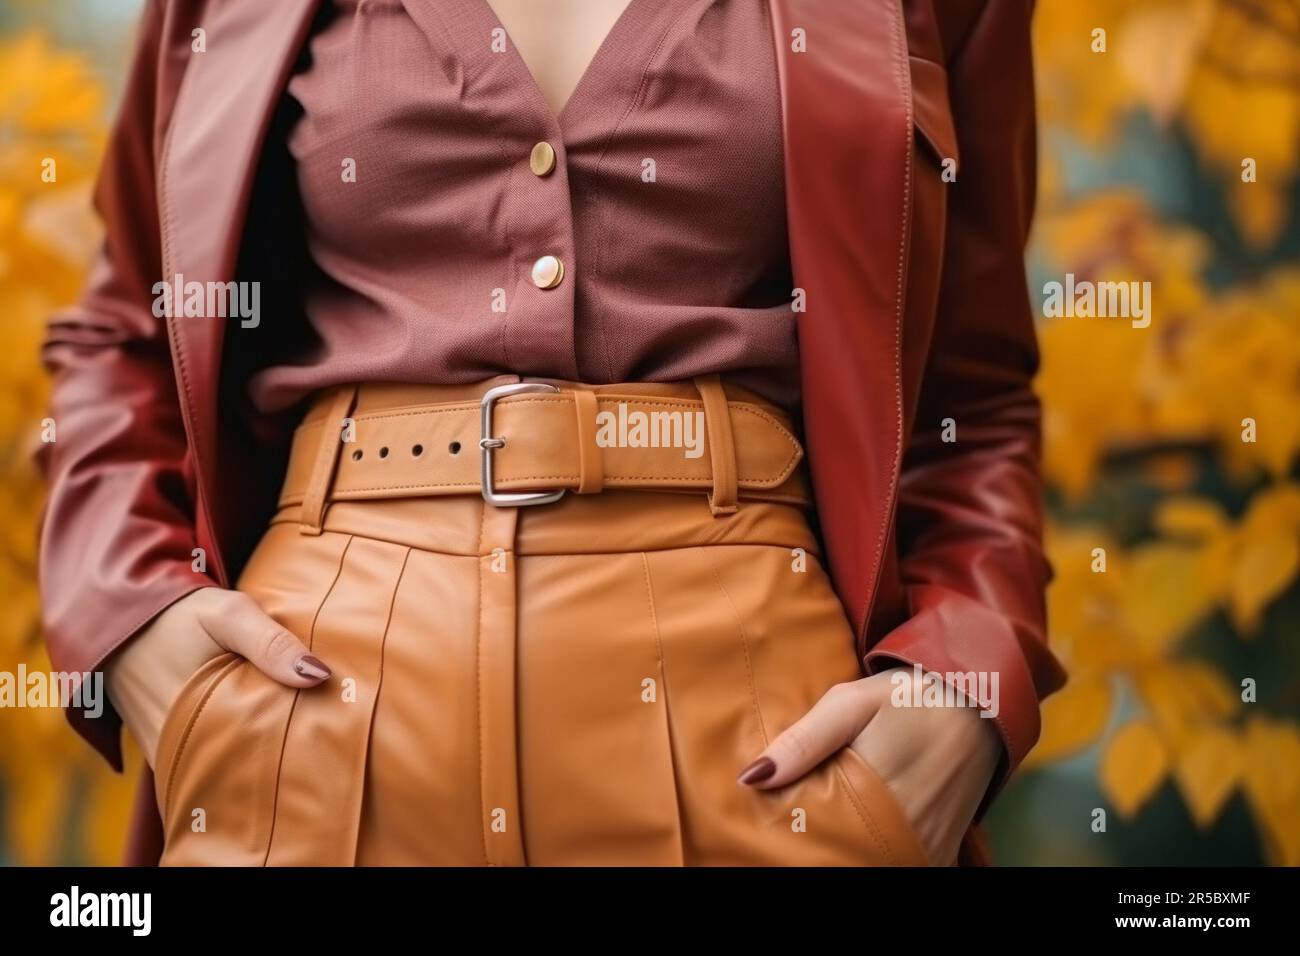 Close up fashion details of dark brown classy leather jacket and orange pants with belt. Fancy women's clothing. Fashion cloth concept Stock Photo